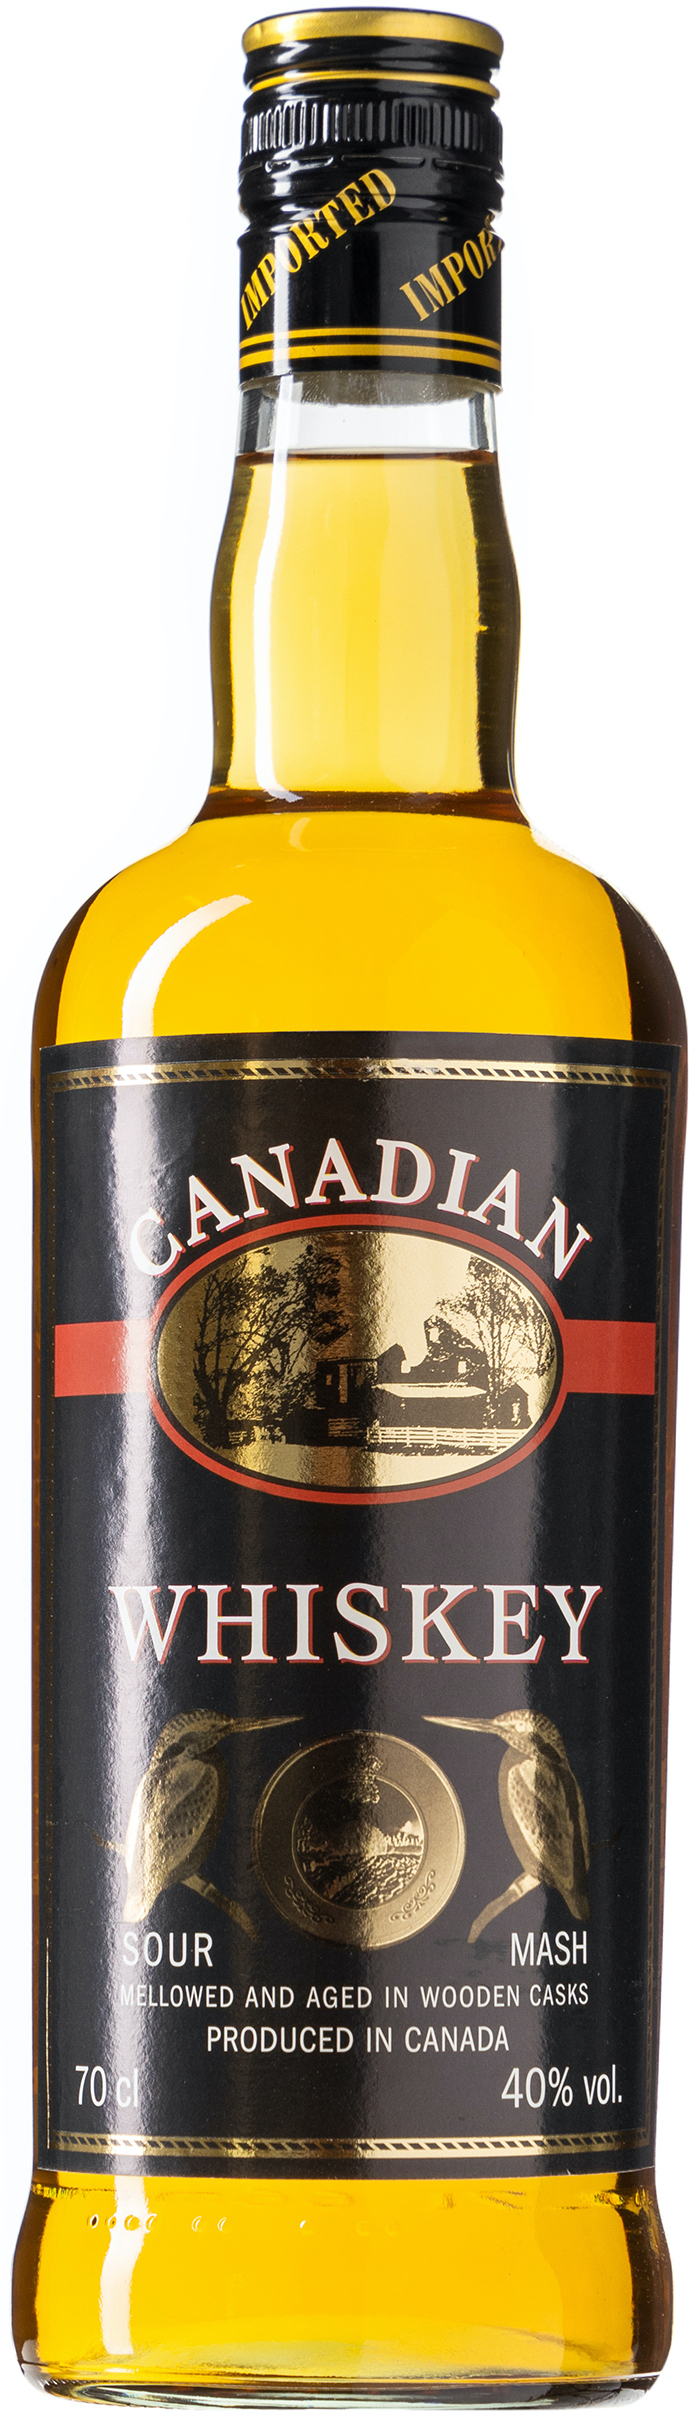 Canadian Whiskey 40% 0,7L